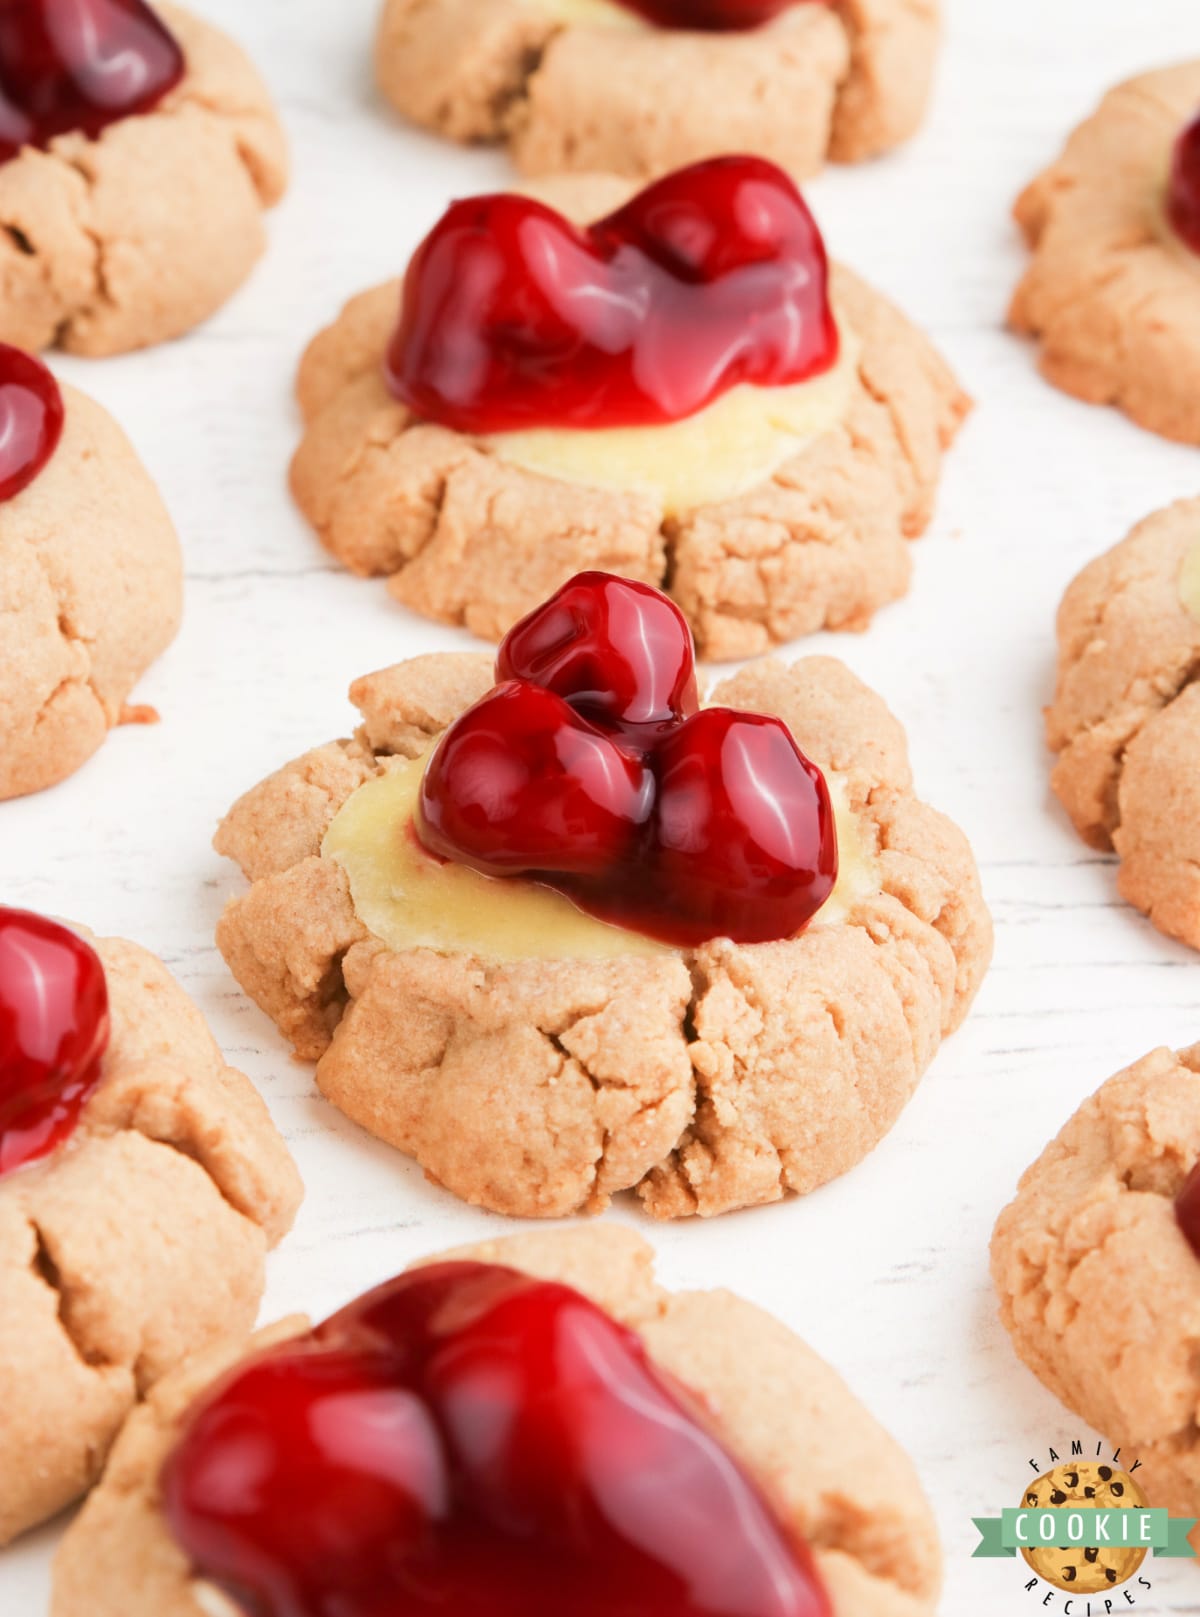 Cheesecake Cookies are graham cracker cookies baked with a simple cheesecake filling and topped with your favorite fruit or pie filling. 